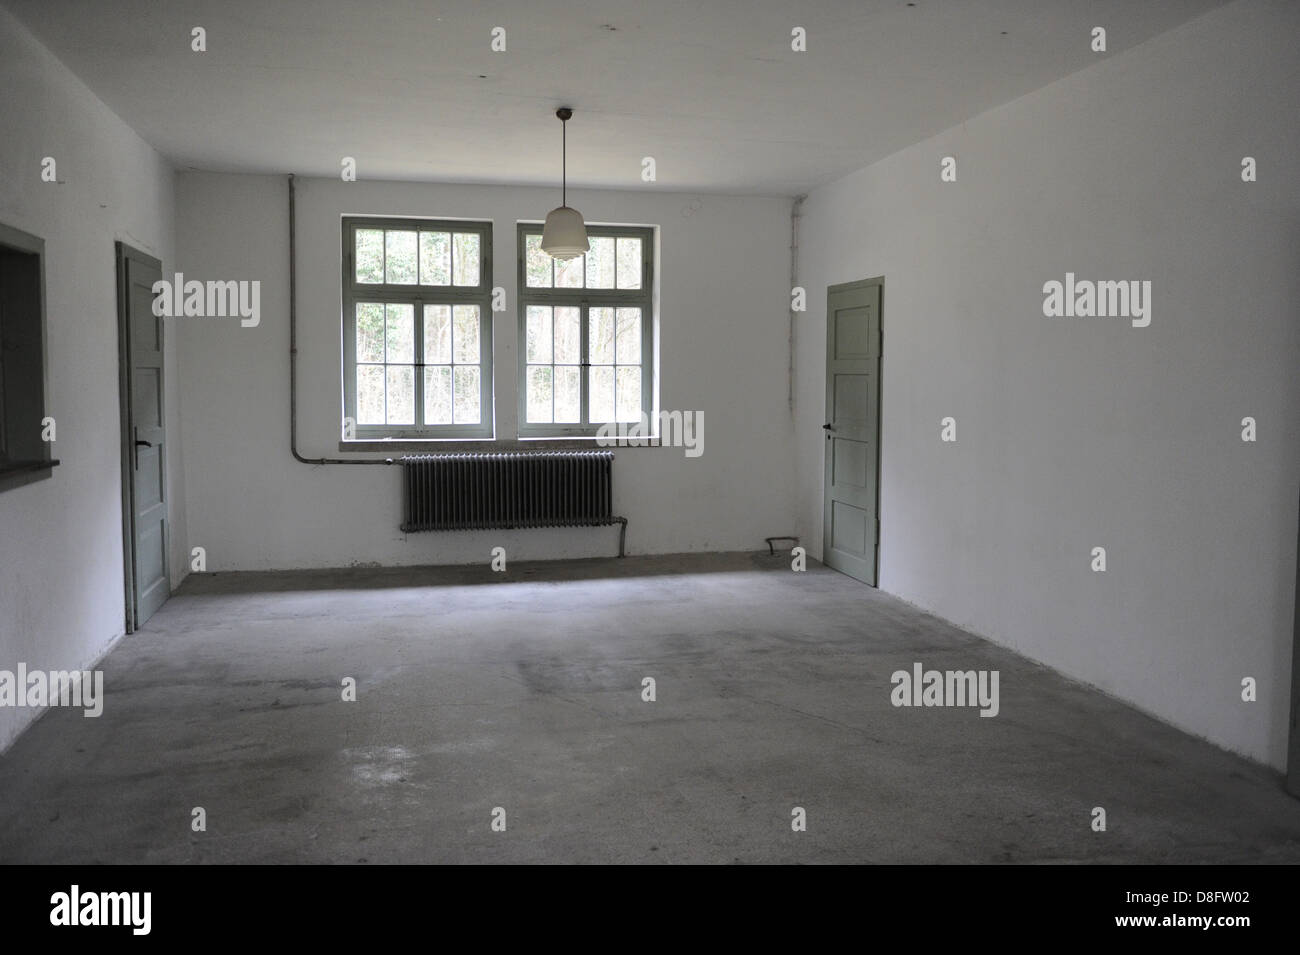 Dachau Concentration Camp. Nazi camp of prisoners opened in 1933. Waiting room. Germany. Stock Photo